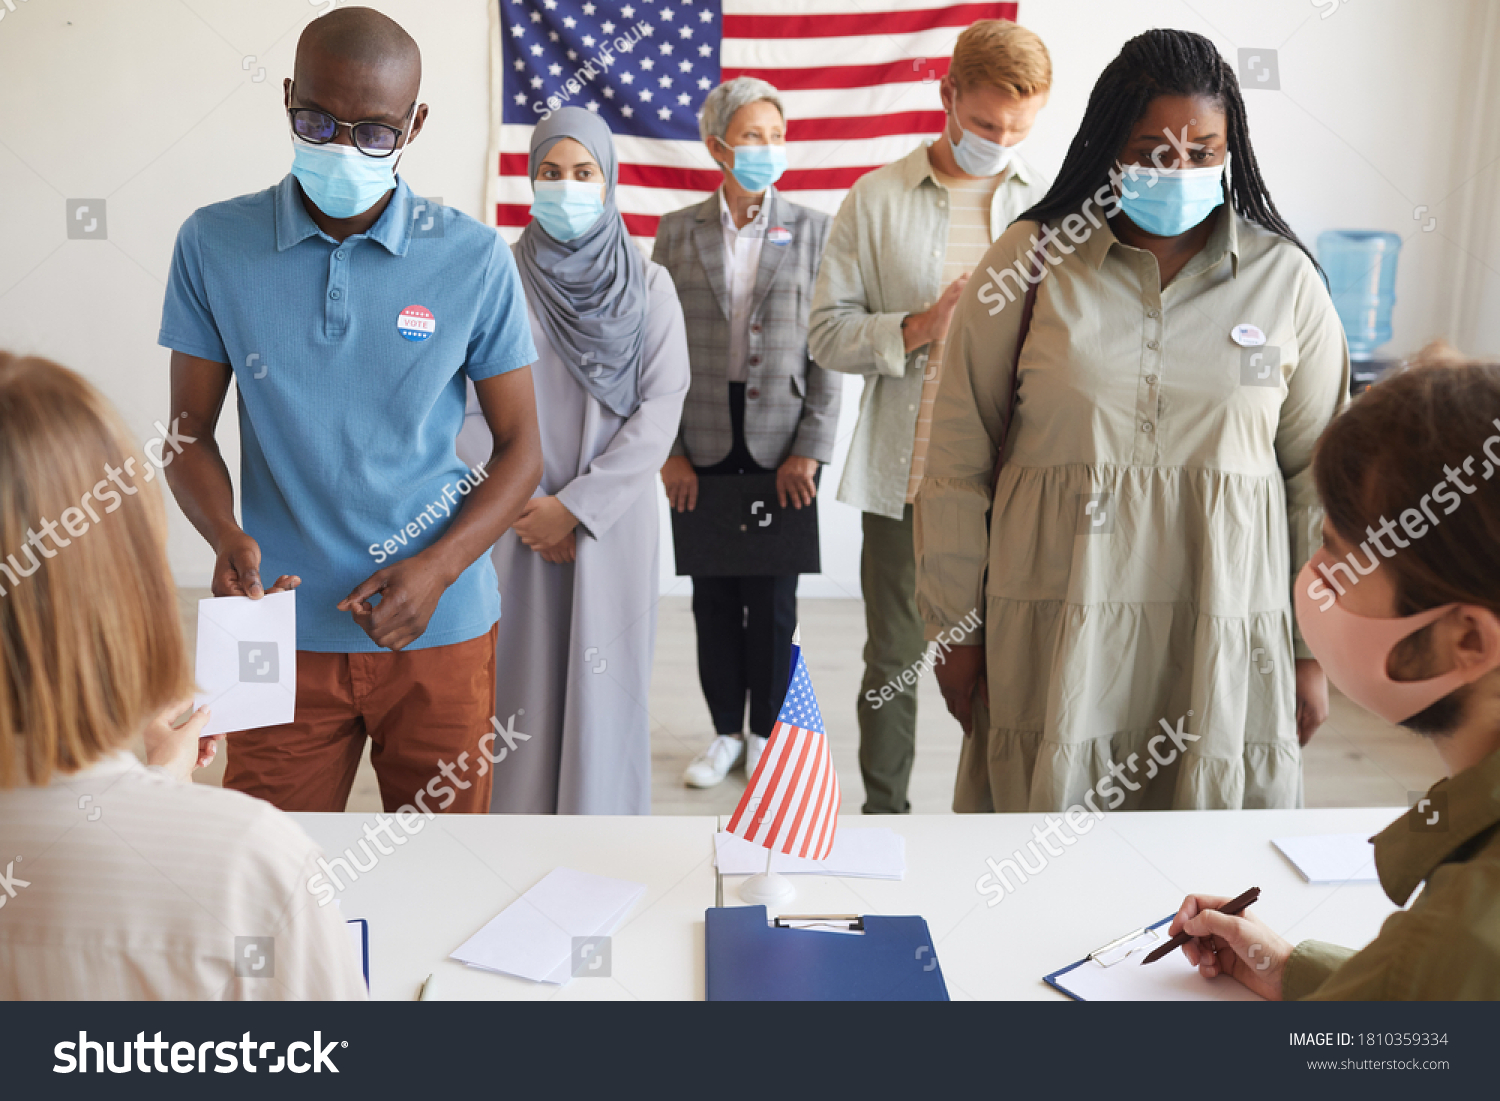 Front view at multi-ethnic group of people standing in row and wearing masks at polling station on election day, focus on two African-American people registering for voting #1810359334